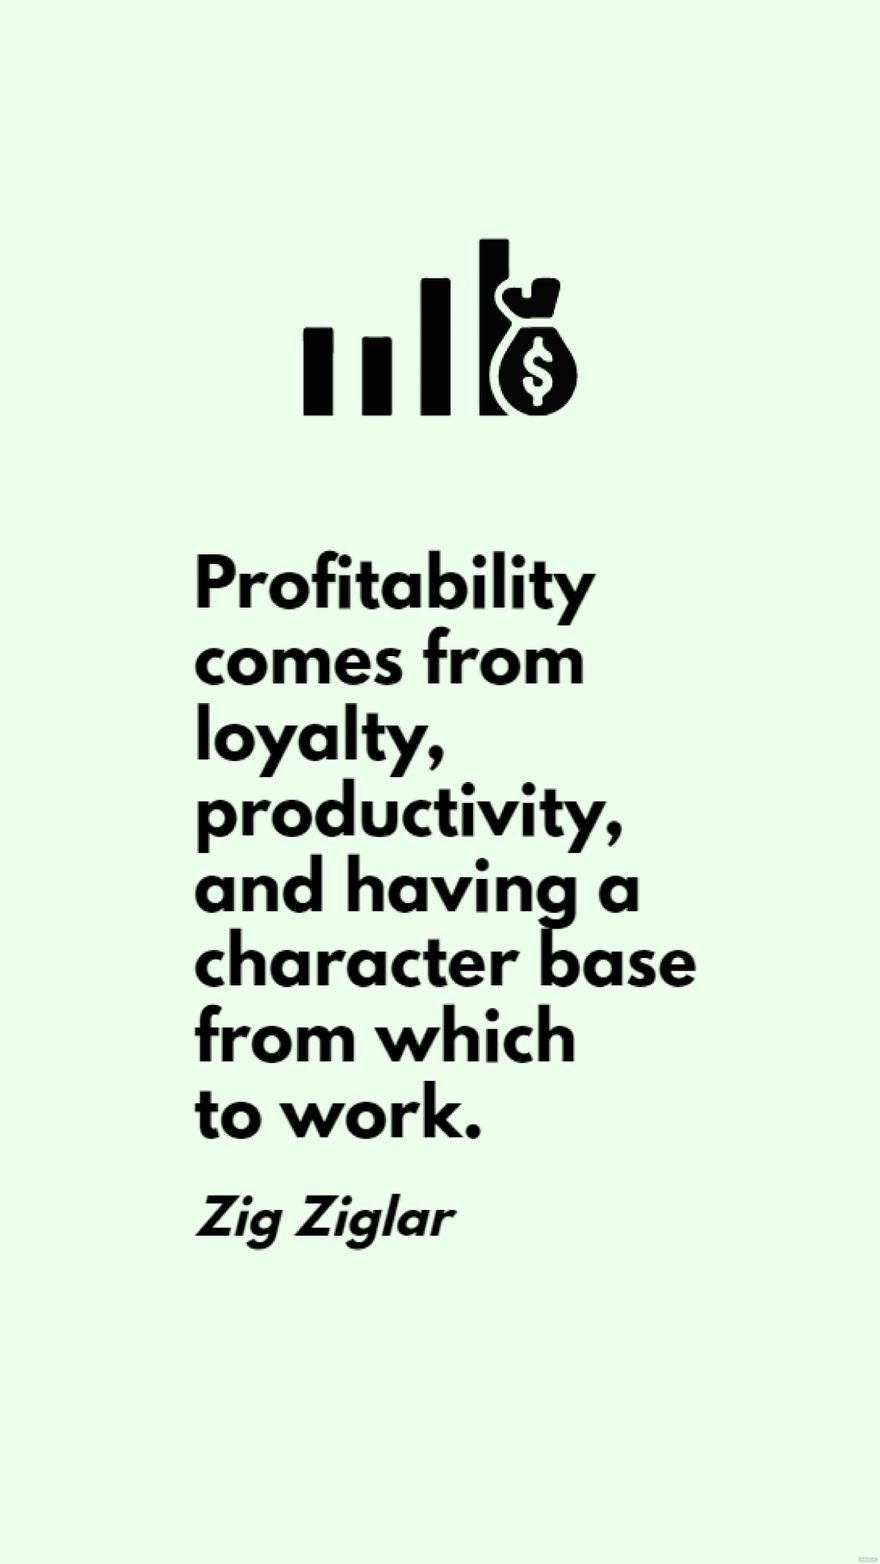 Free Zig Ziglar - Profitability comes from loyalty, productivity, and having a character base from which to work.